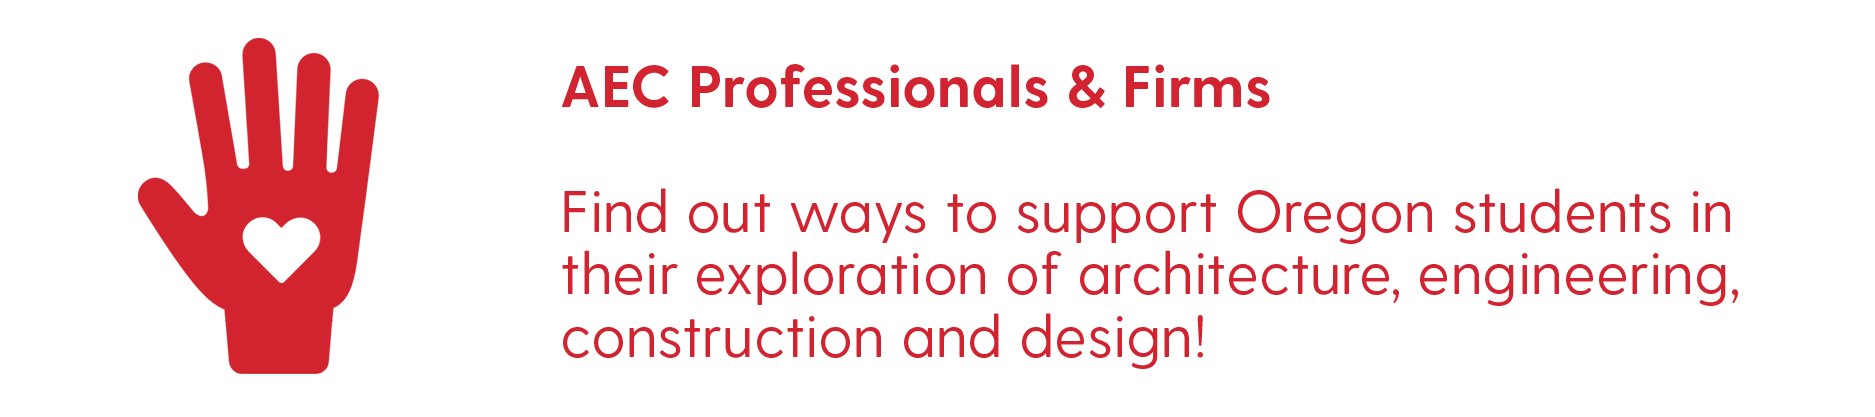 AEC Professionals & Firms: Find out ways to support Oregon students in their exploration of architecture, engineering, construction and design!